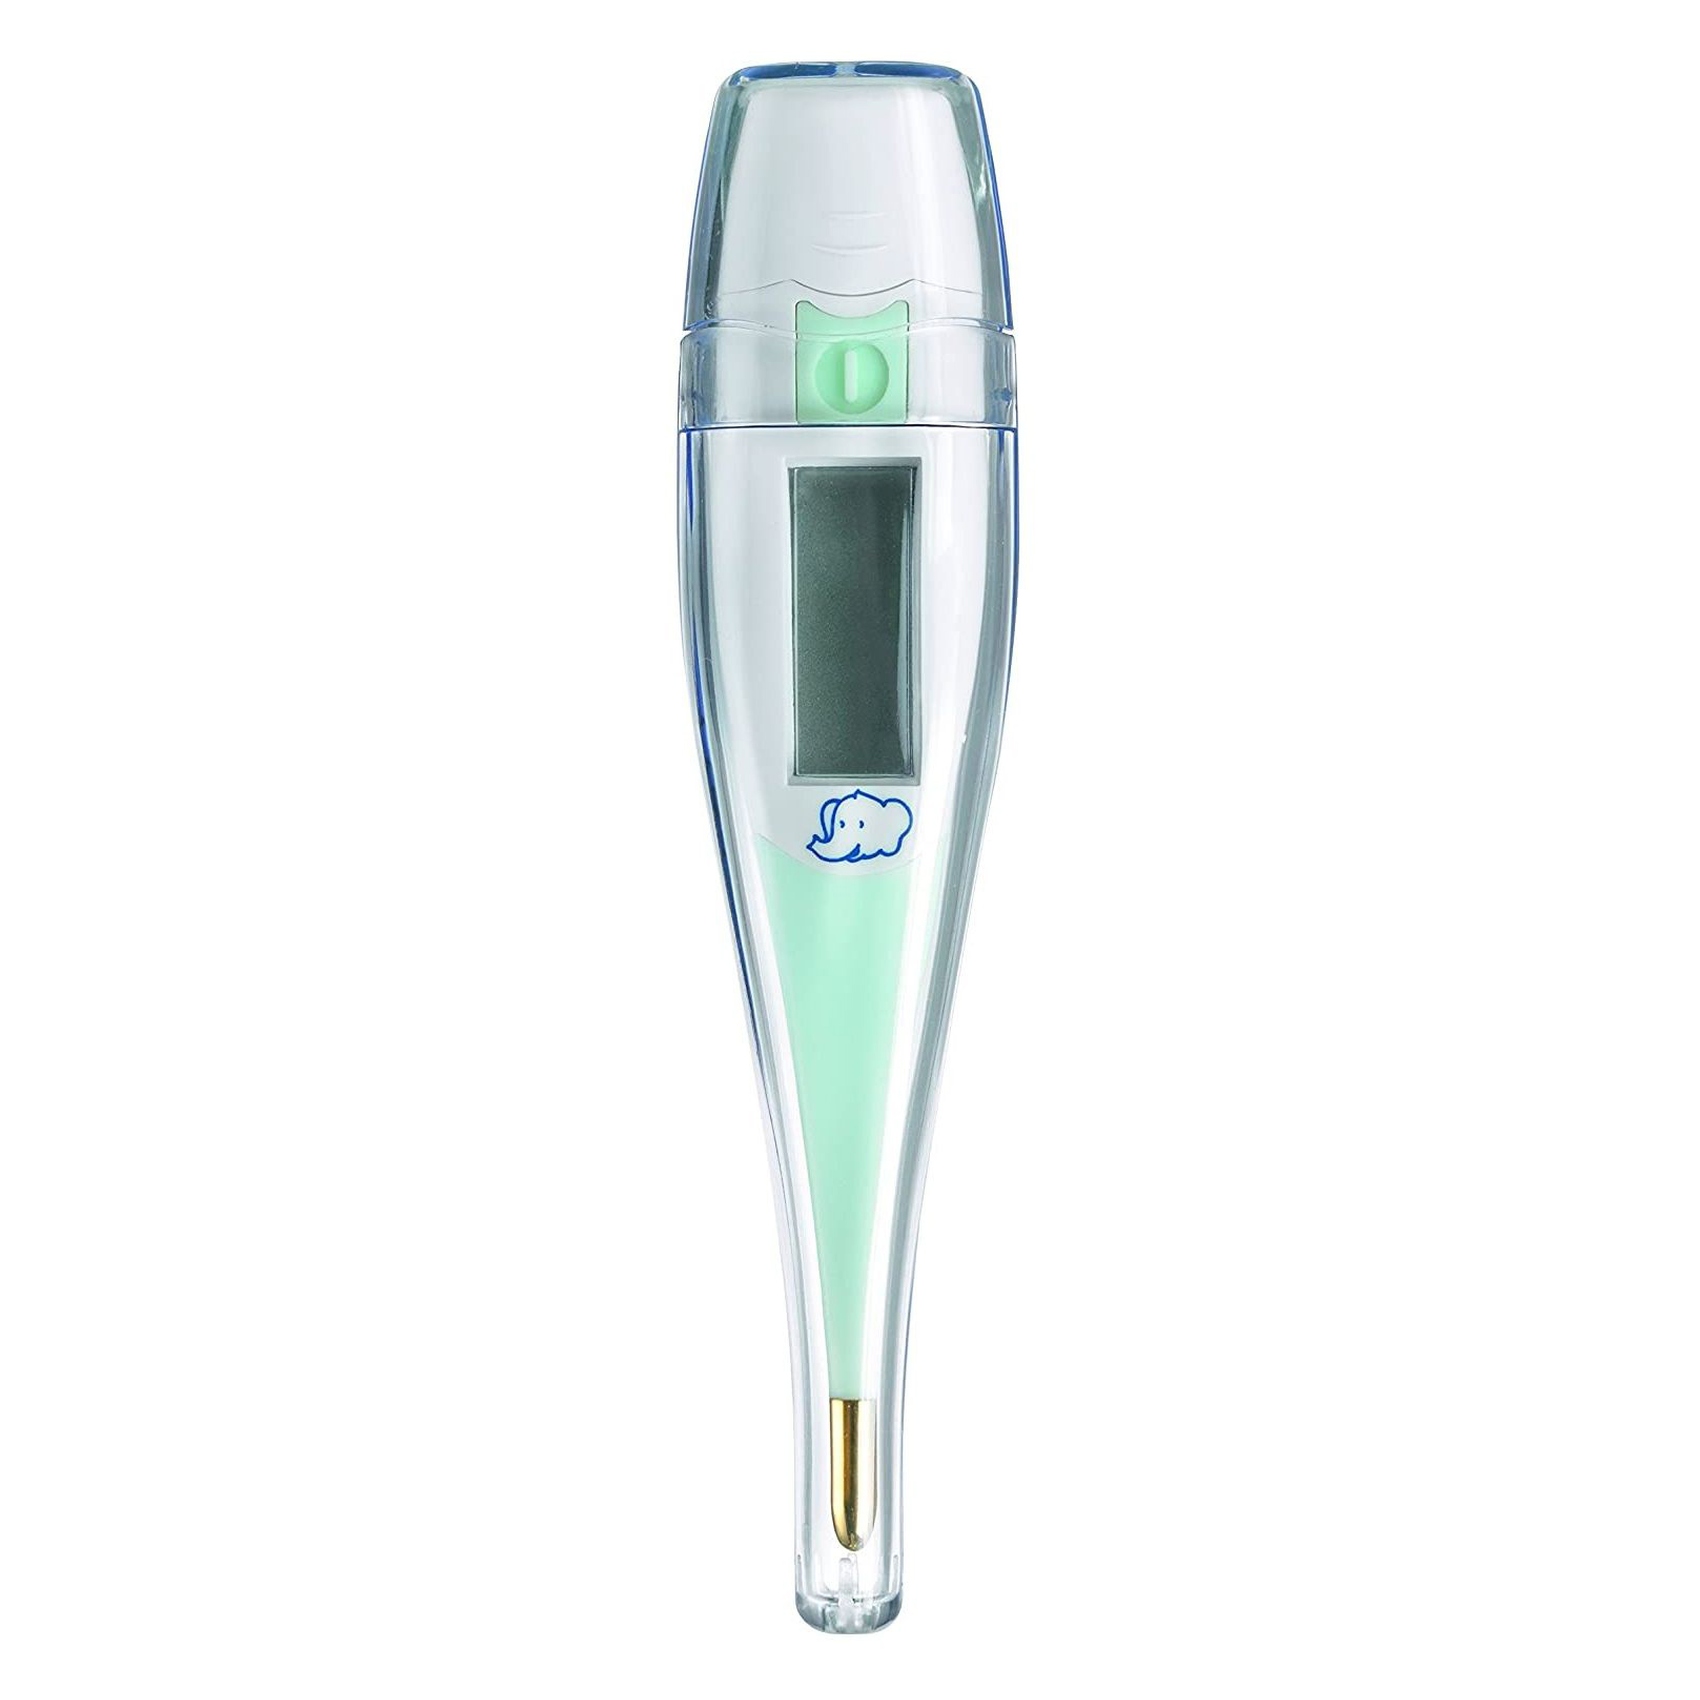 Bebeconfort Ultra Fast Flexible Thermometer